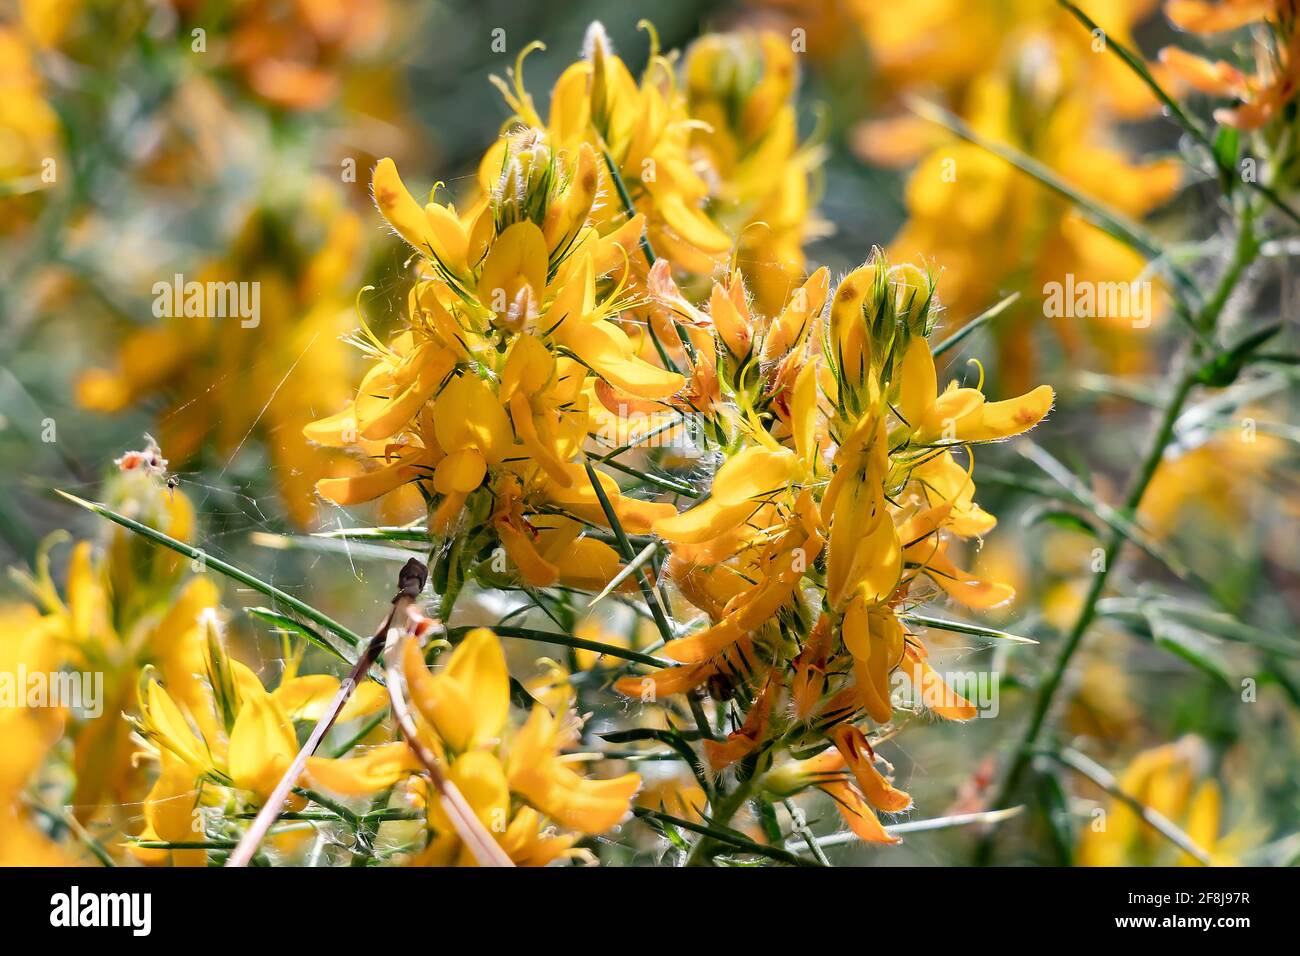 Genista hirsuta, commonly called gorse or pincushion gorse, is a shrub of the Legume family. Genista is a genus of flowering plants in the legume fami Stock Photo